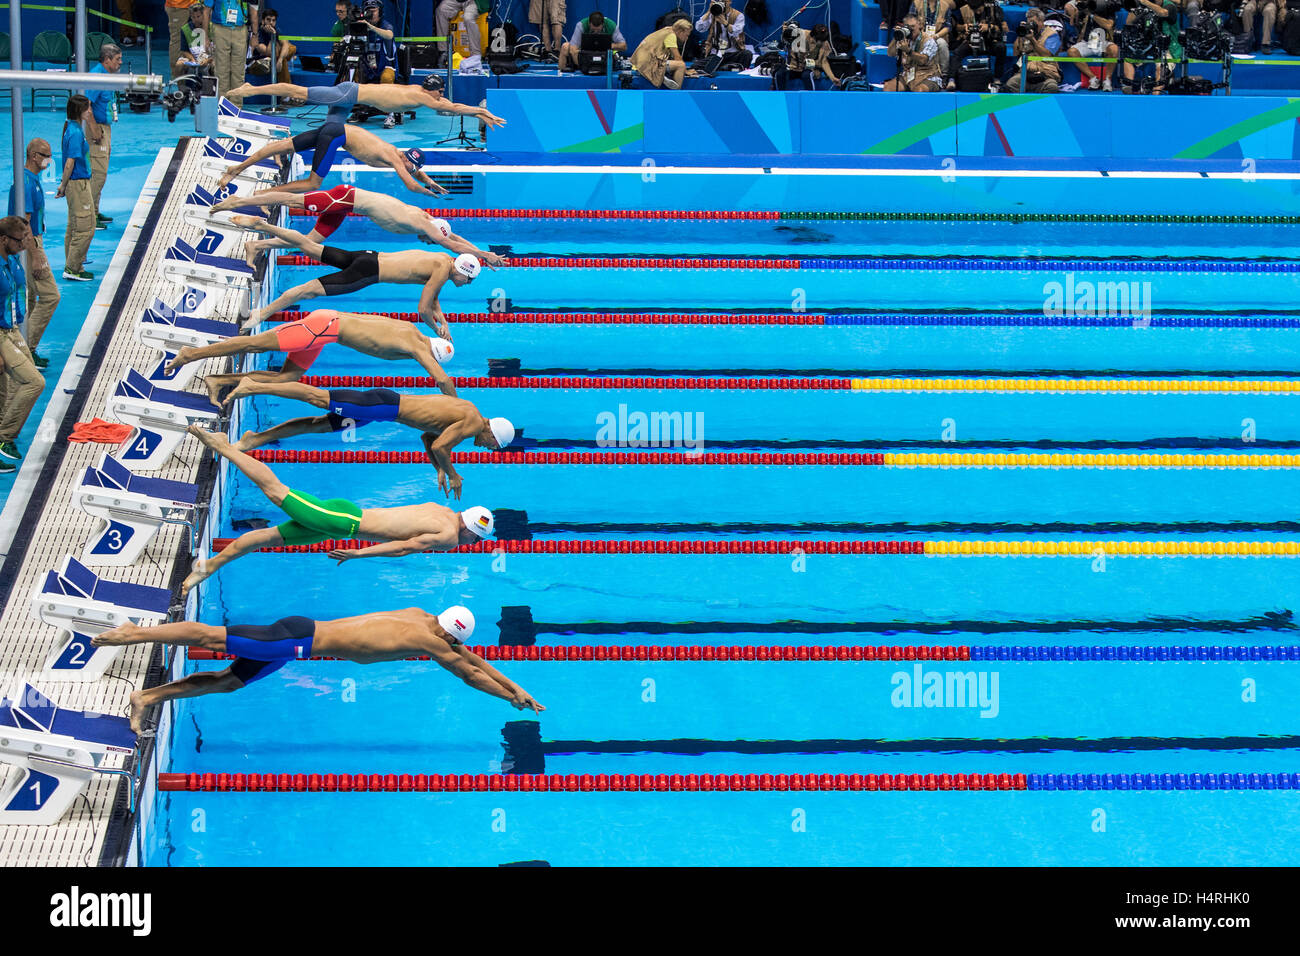 Rio de Janeiro, Brazil. 6 August 2016. Start of the Men's 400m Freestyle heat at the 2016 Olympic Summer Games.© Paul J. Sutton/PCN Photography. Stock Photo